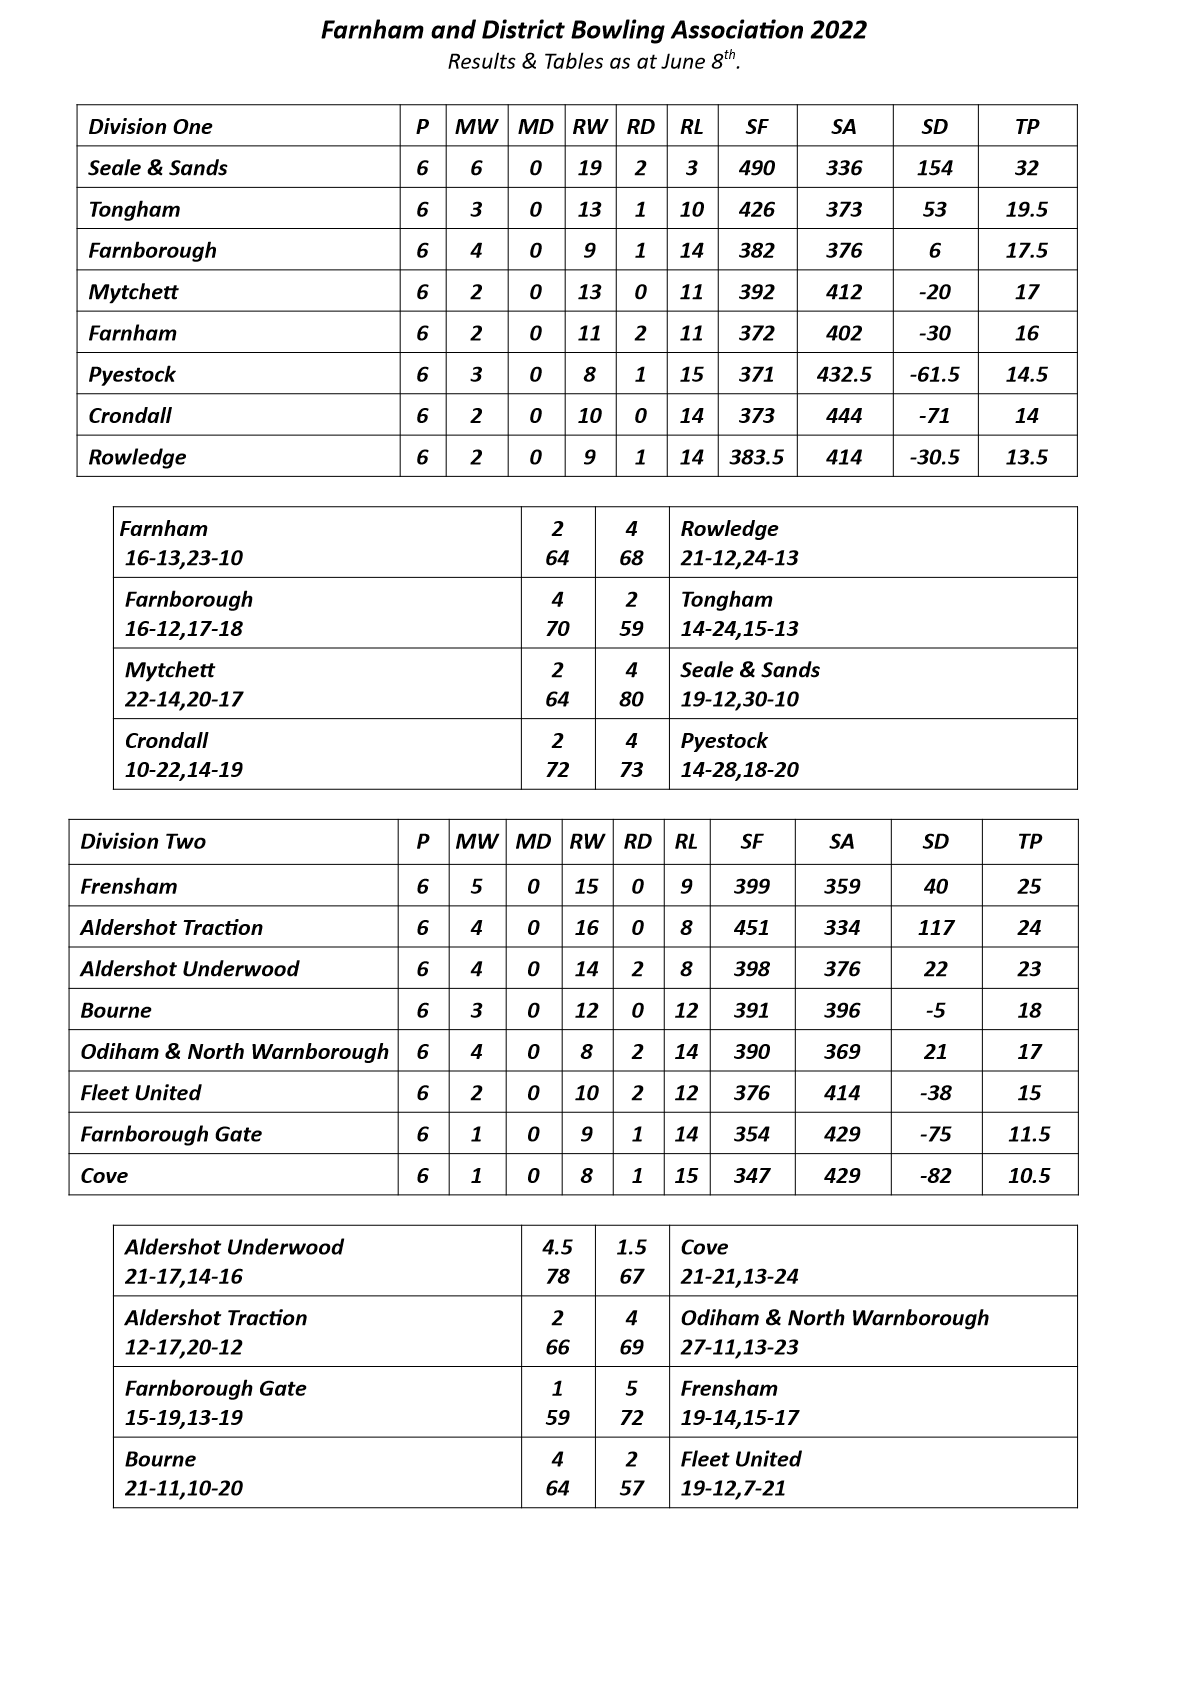  Farnham&District Bowling Association  Tables & Results as at June 8th